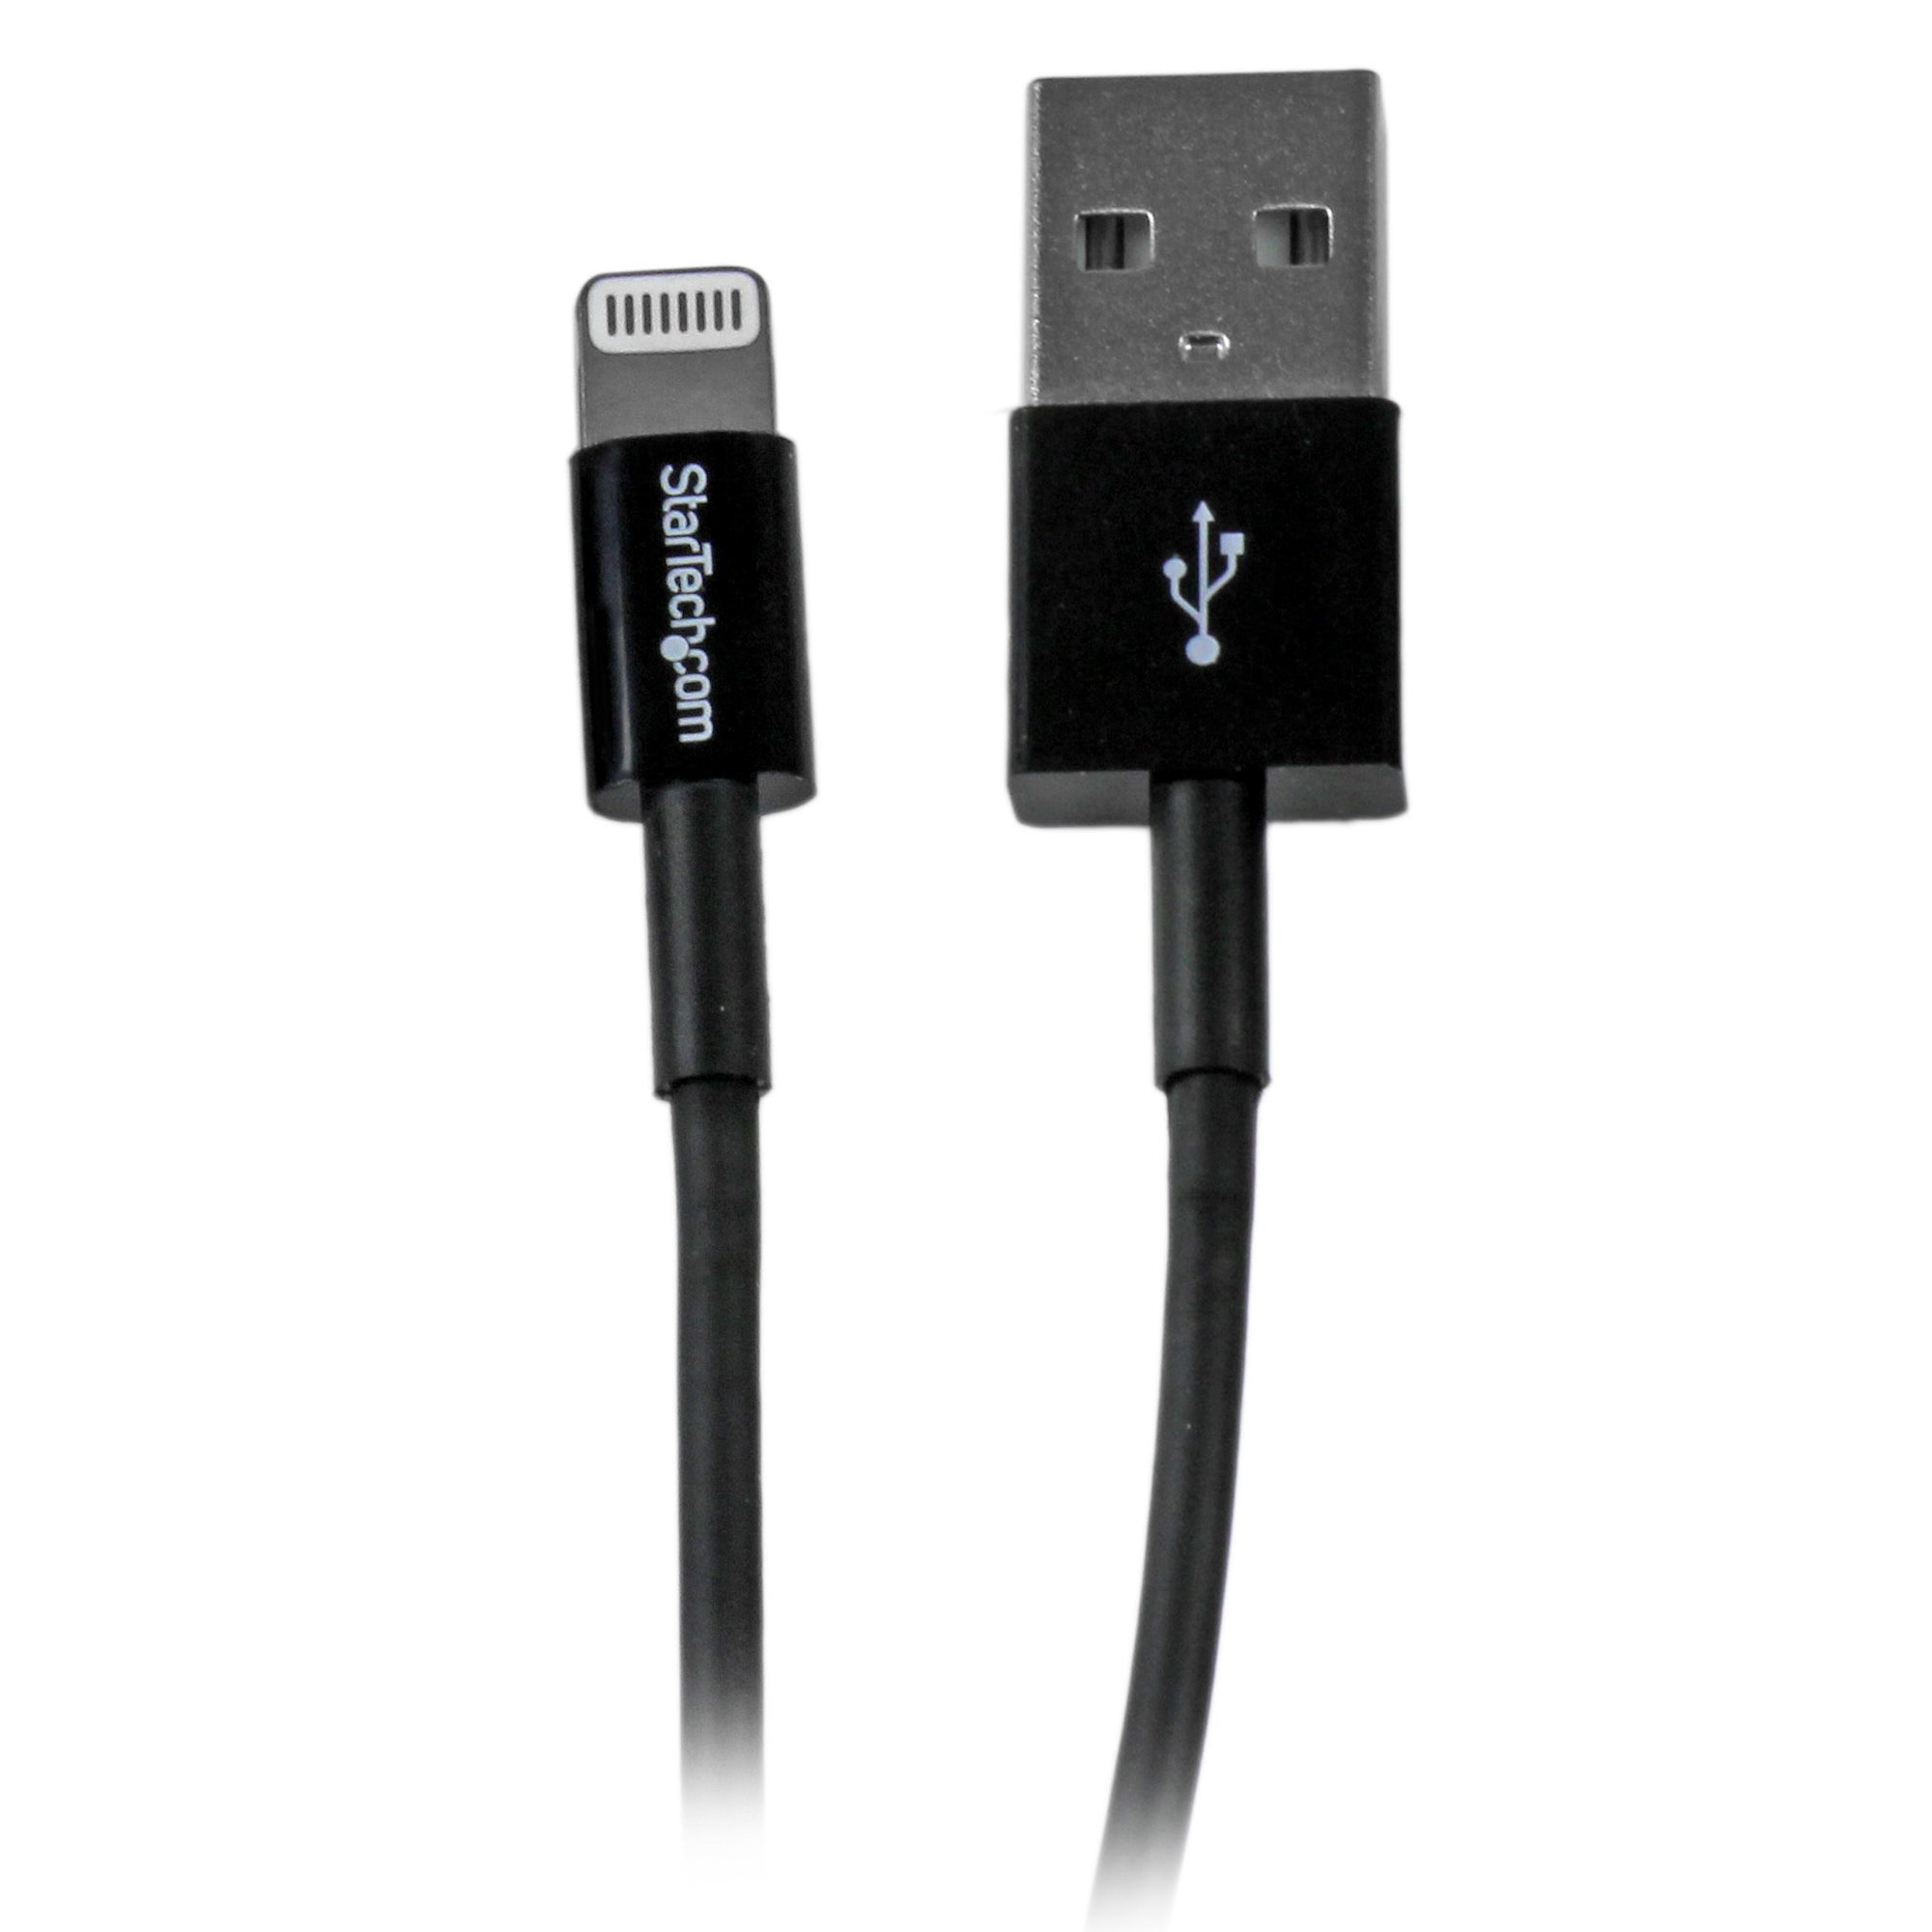 1m Black Slim Lightning to USB Cable - Lightning Cables, Cables